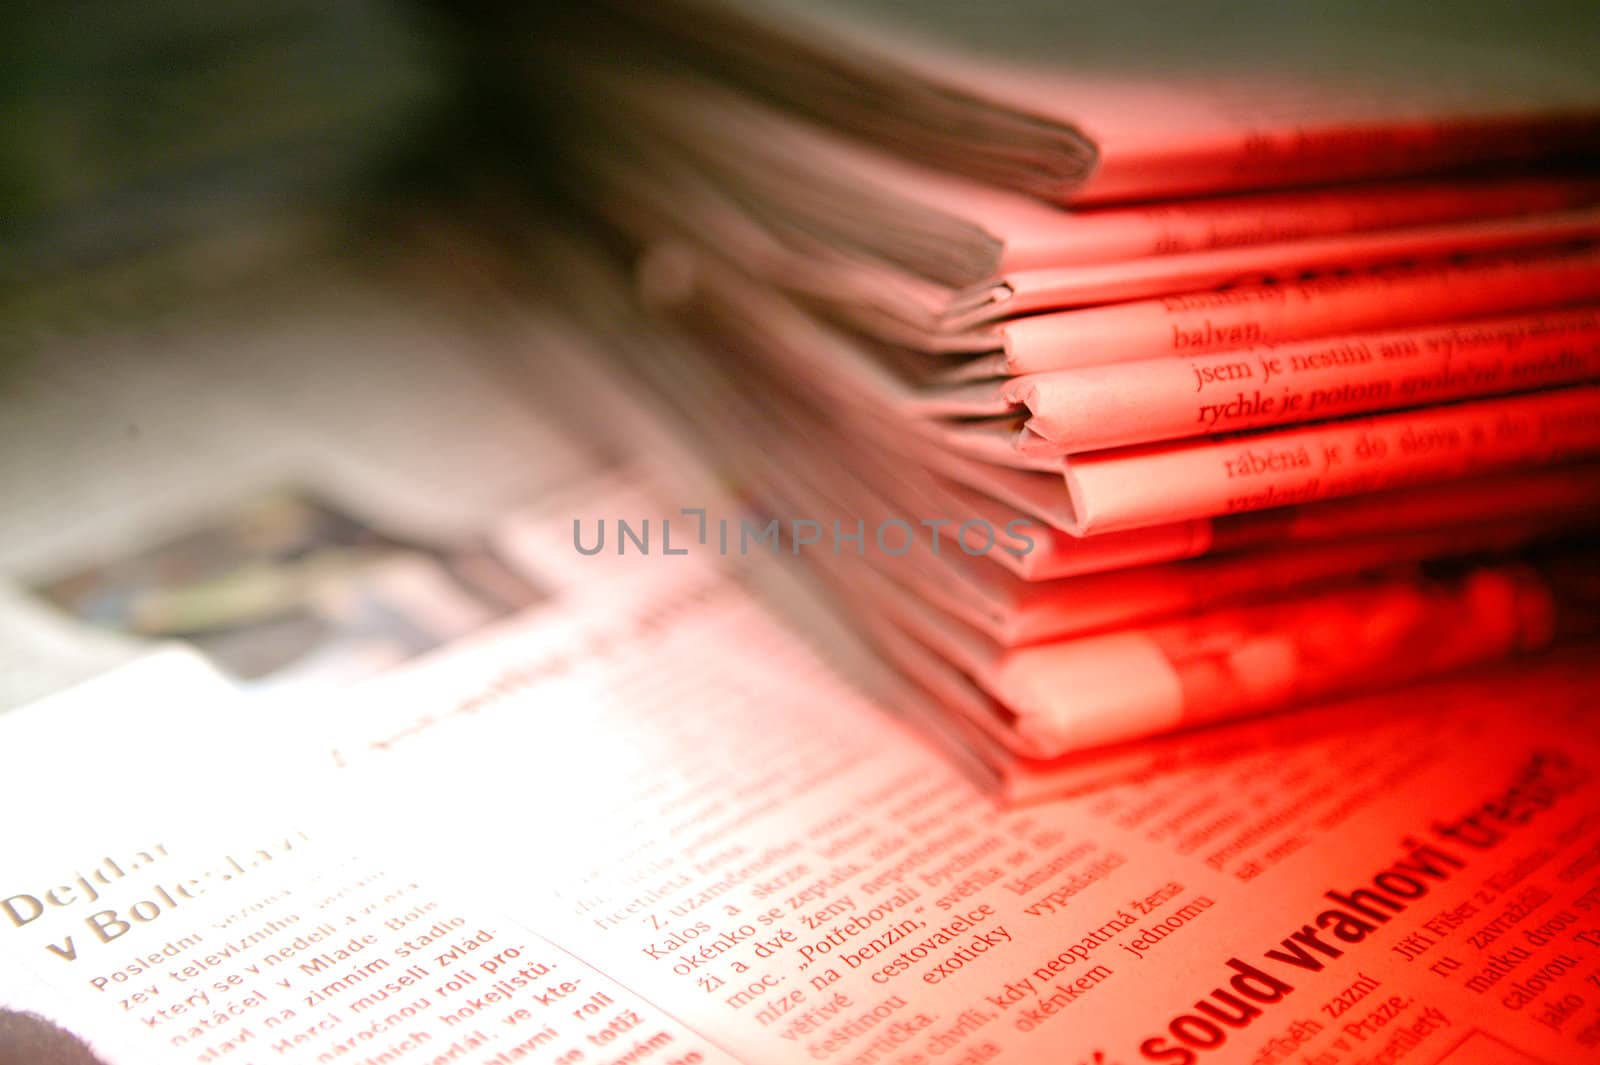 A detail of a pile of newspaper in red light